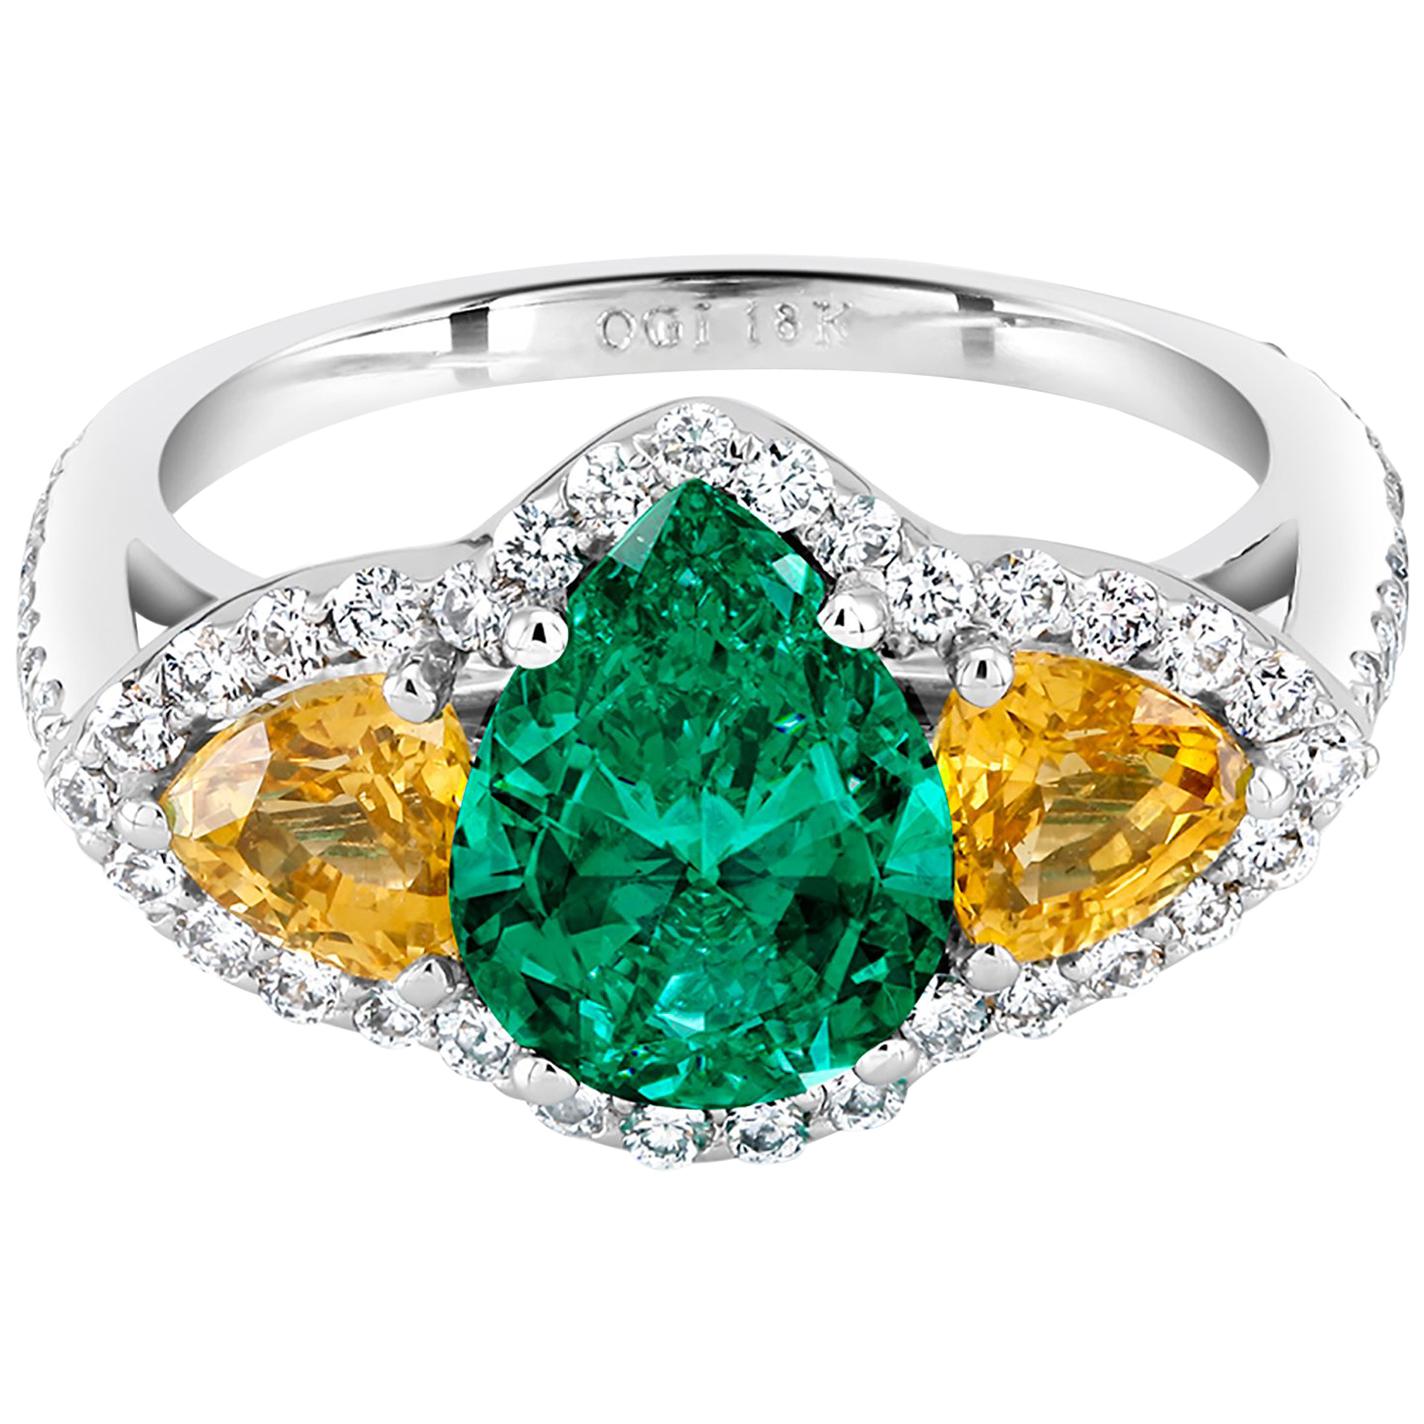 Colombian Emerald and Diamond Cluster Ring Weighing 3.36 Carat